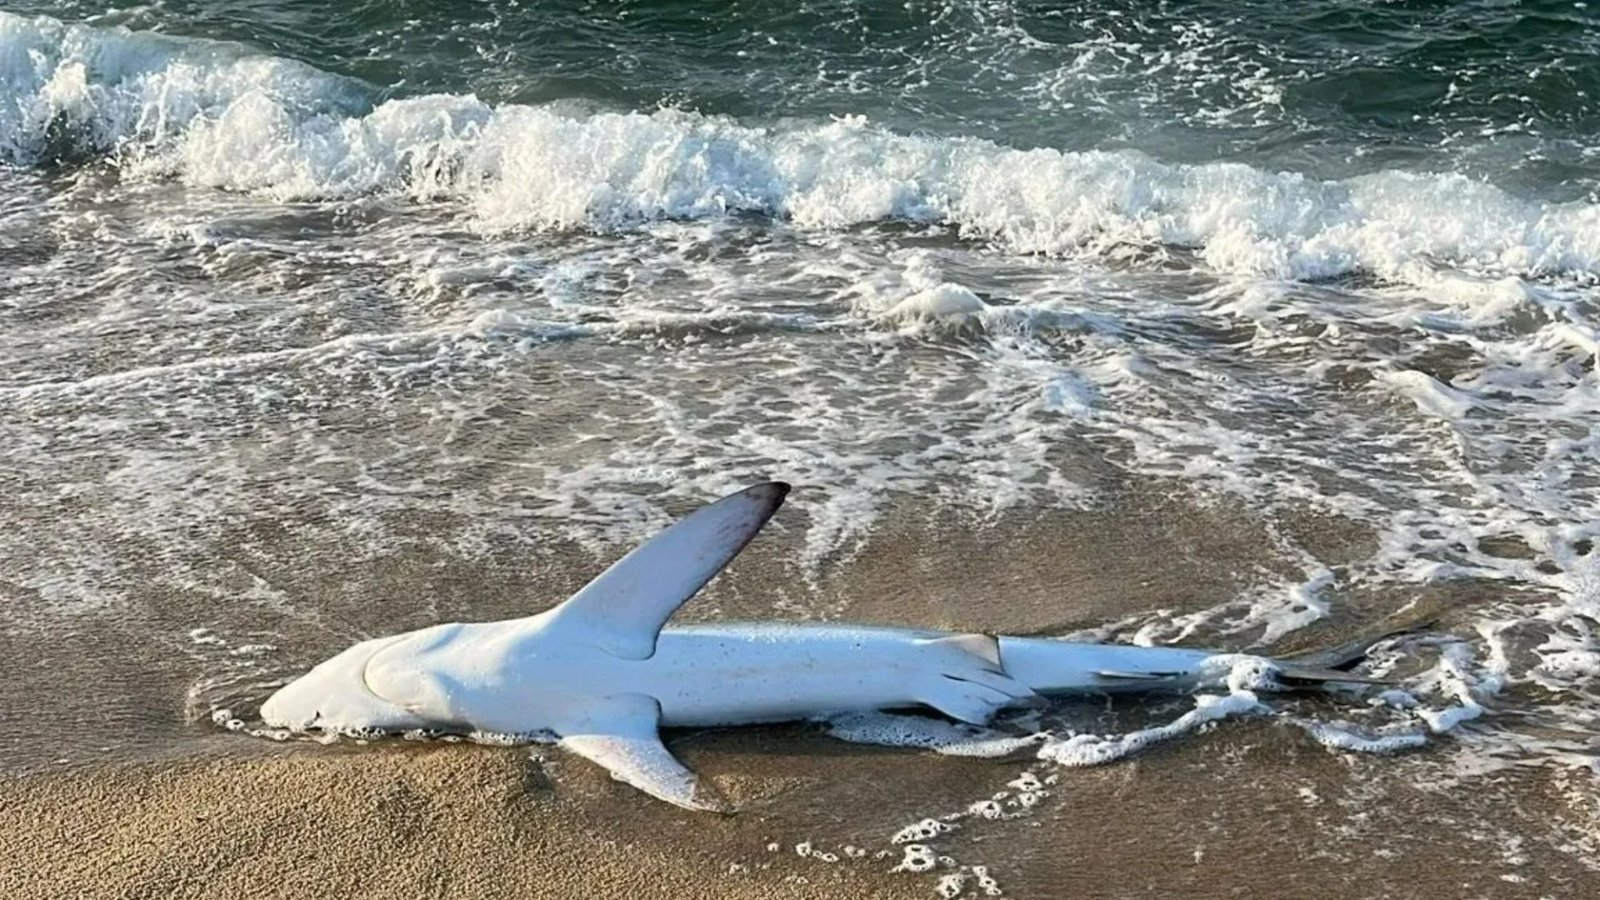 Suicidal 8ft long giant shark with serrated teeth washes up on Brit favourite holiday beach determined to die